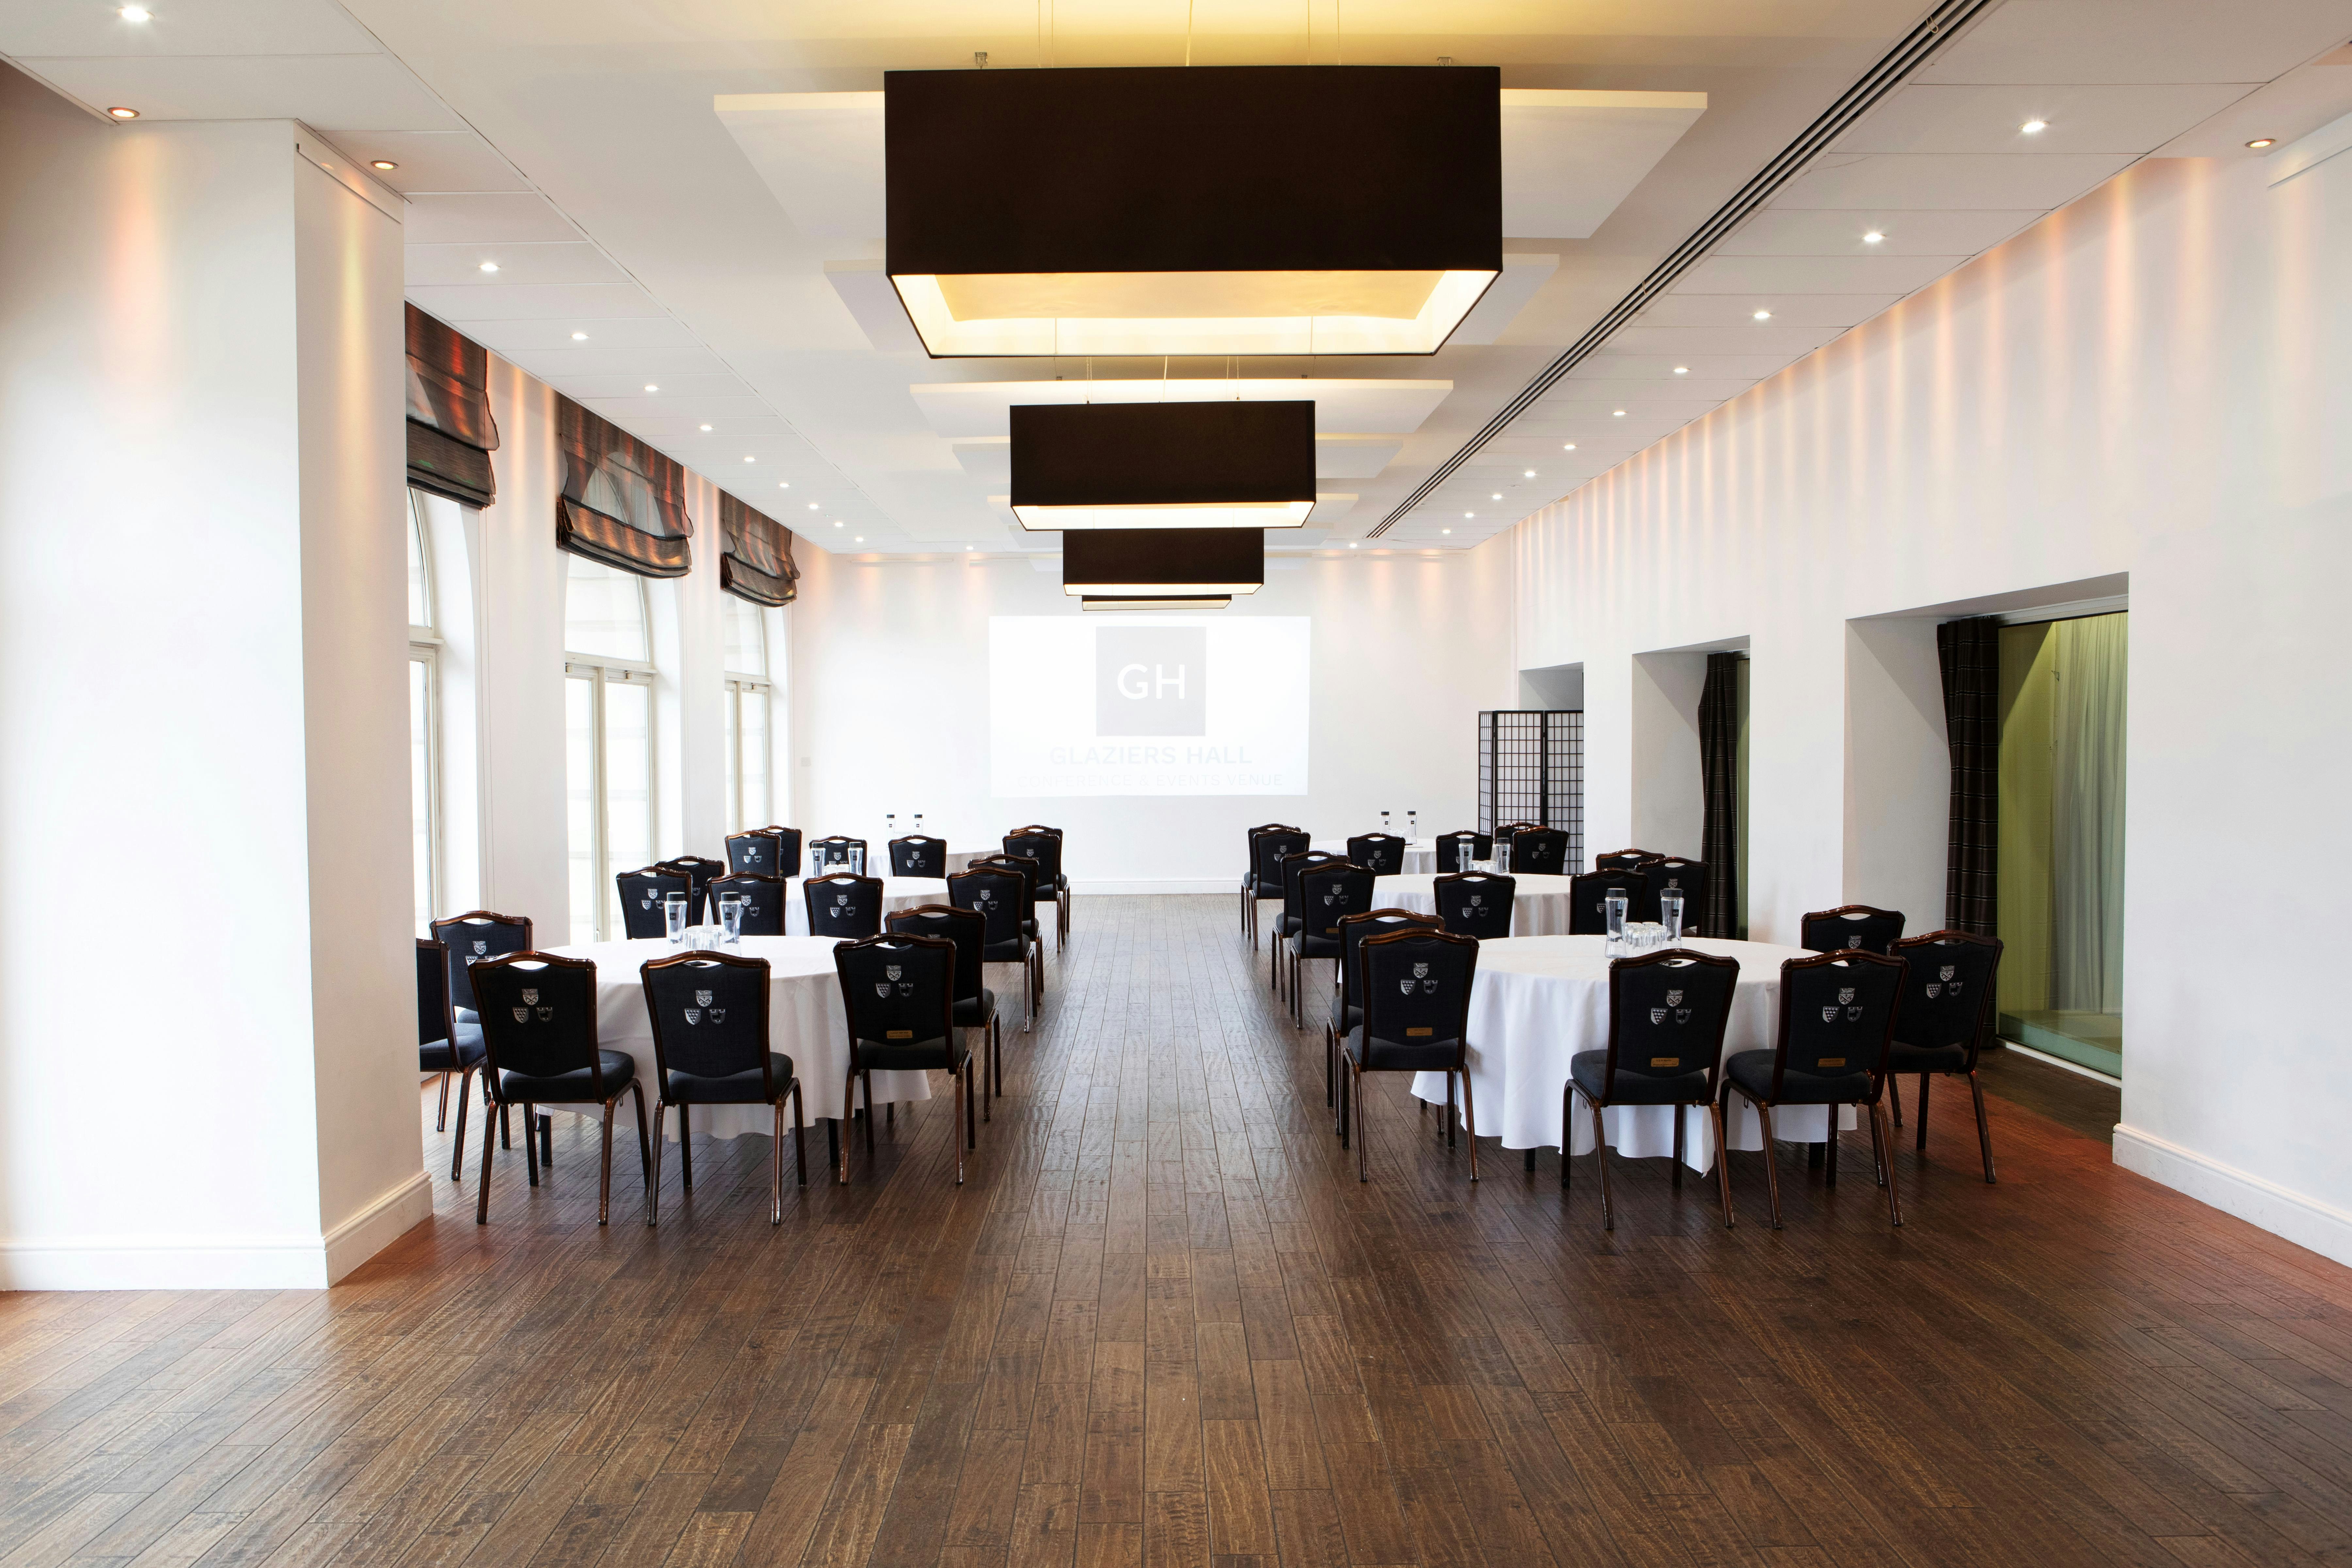 Glaziers Hall - The River Room image 5